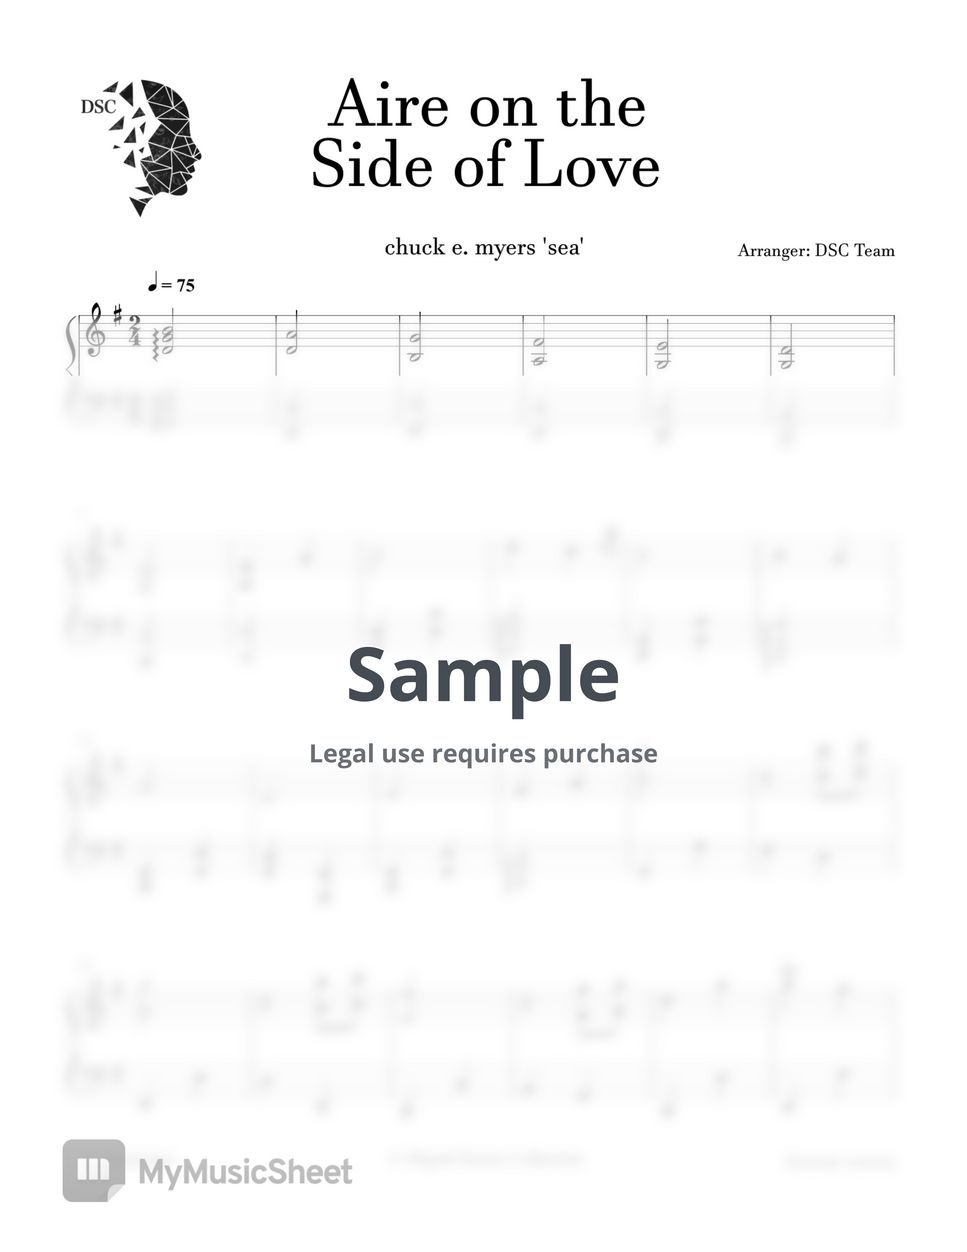 chuck e myers 'sea' - Aire on the Side of Love by Digital Scores Collection